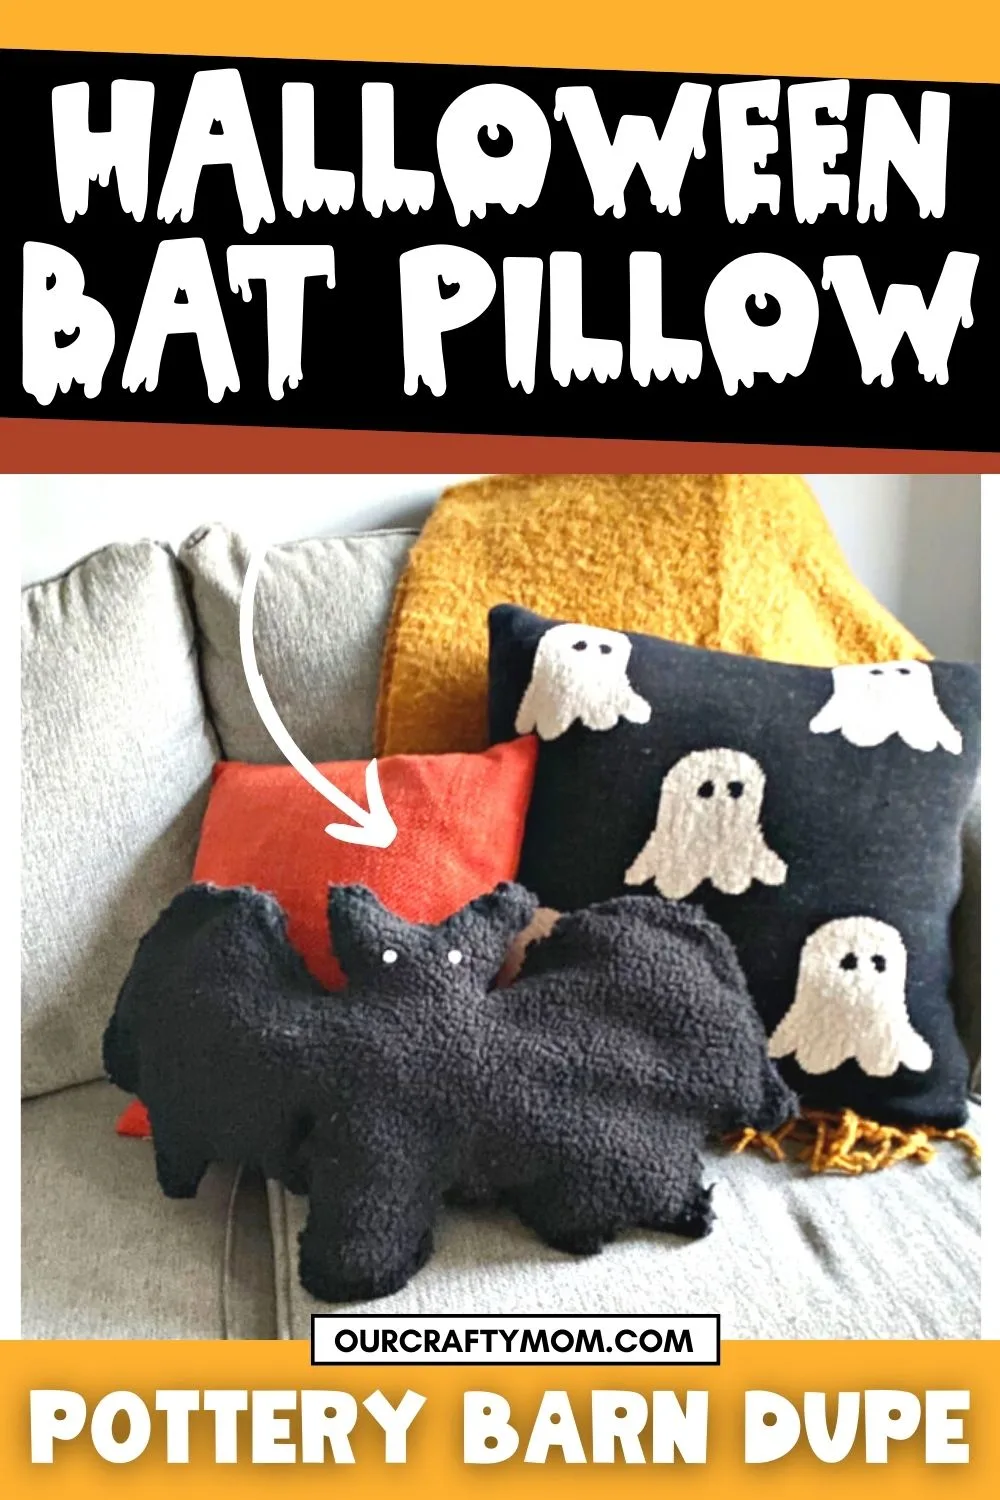 DIY bat pillow with ghost pillow in living room